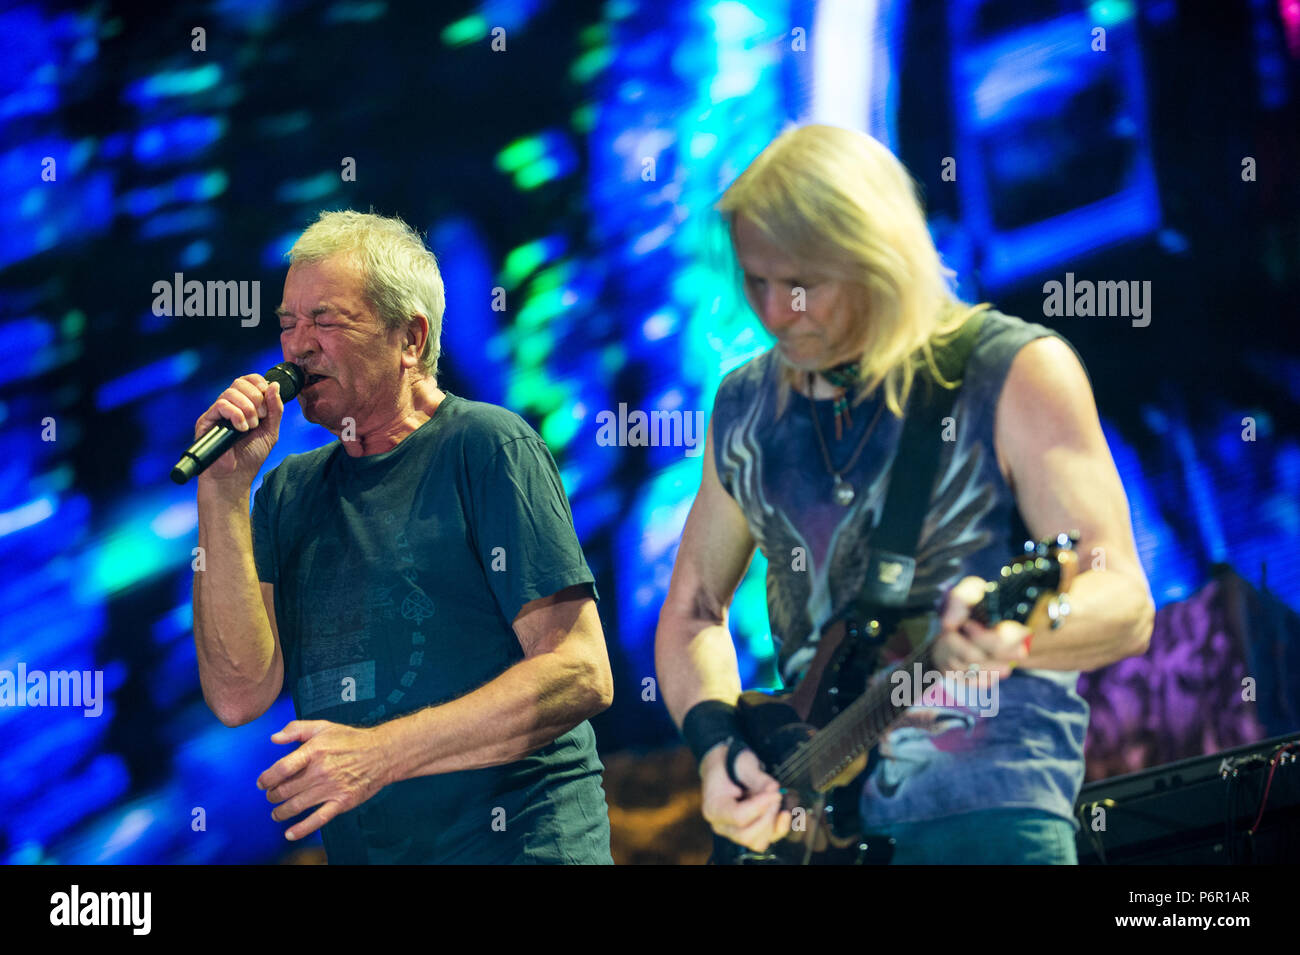 Krakow, Poland. 1st July, 2018. Deep Purple vocalist, Ian Gillan and Deep Purple guitar player, Steve Morse perform. Deep purple band performs at Tauron Arena Krakow as part of the farewell tour, The Long Goodbye Tour. Credit: Omar Marques/SOPA Images/ZUMA Wire/Alamy Live News Stock Photo